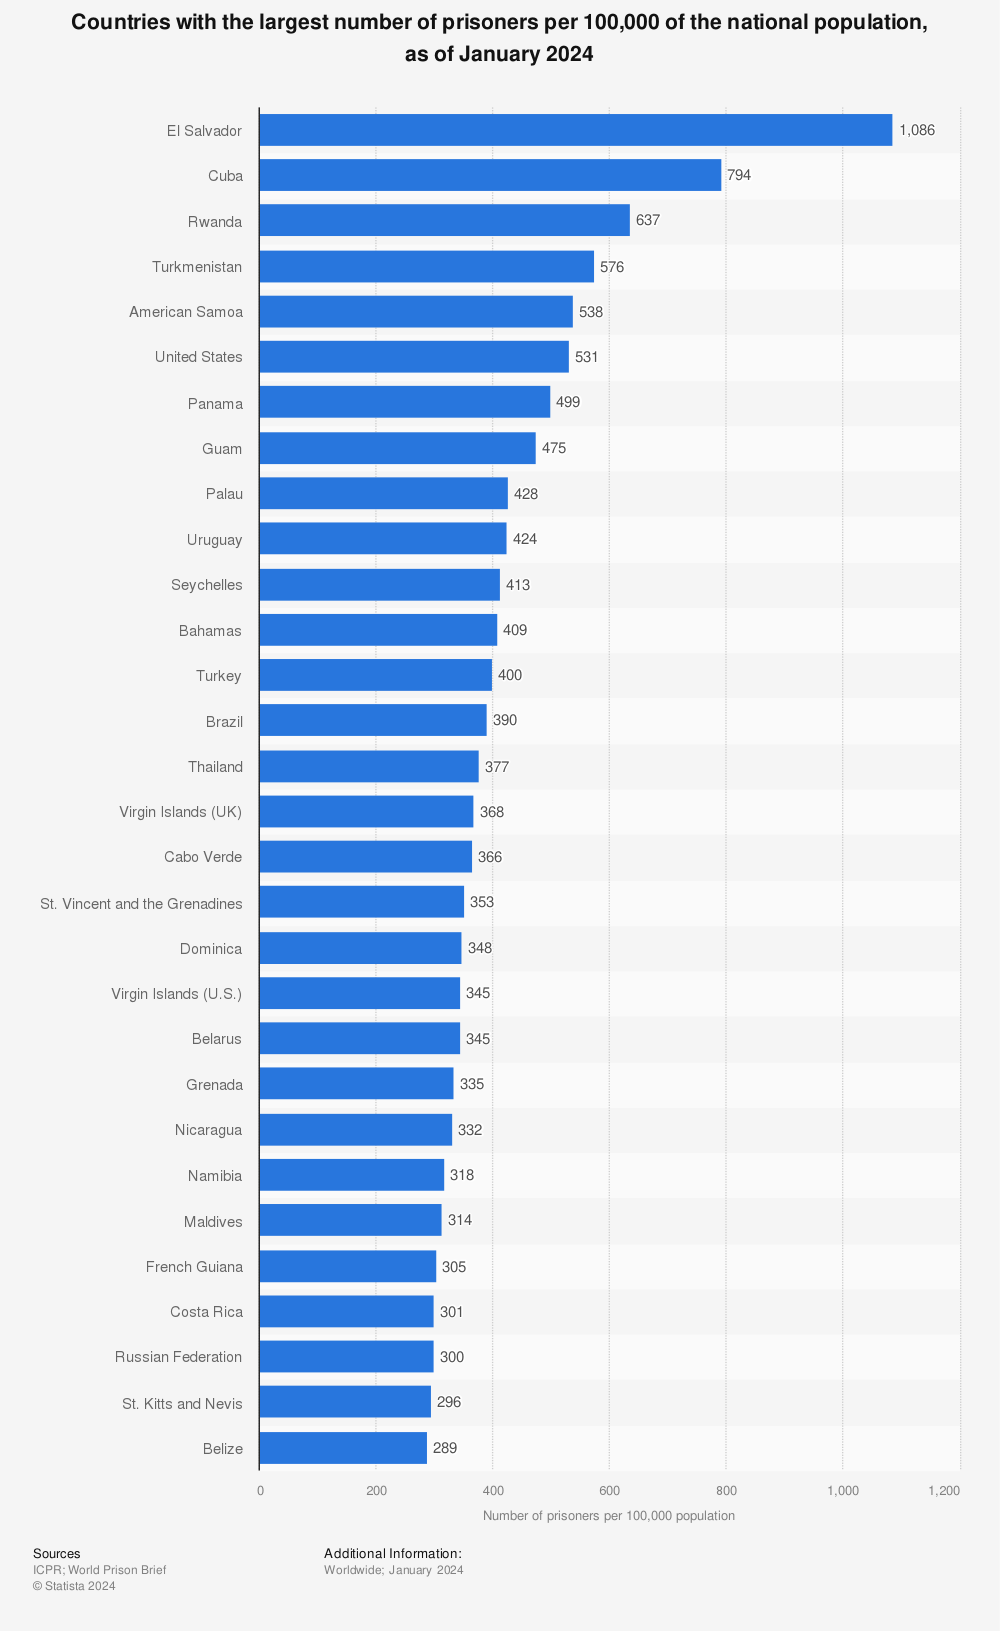 Statistic: Countries with the largest number of prisoners per 100,000 of the national population, as of January 2023 | Statista